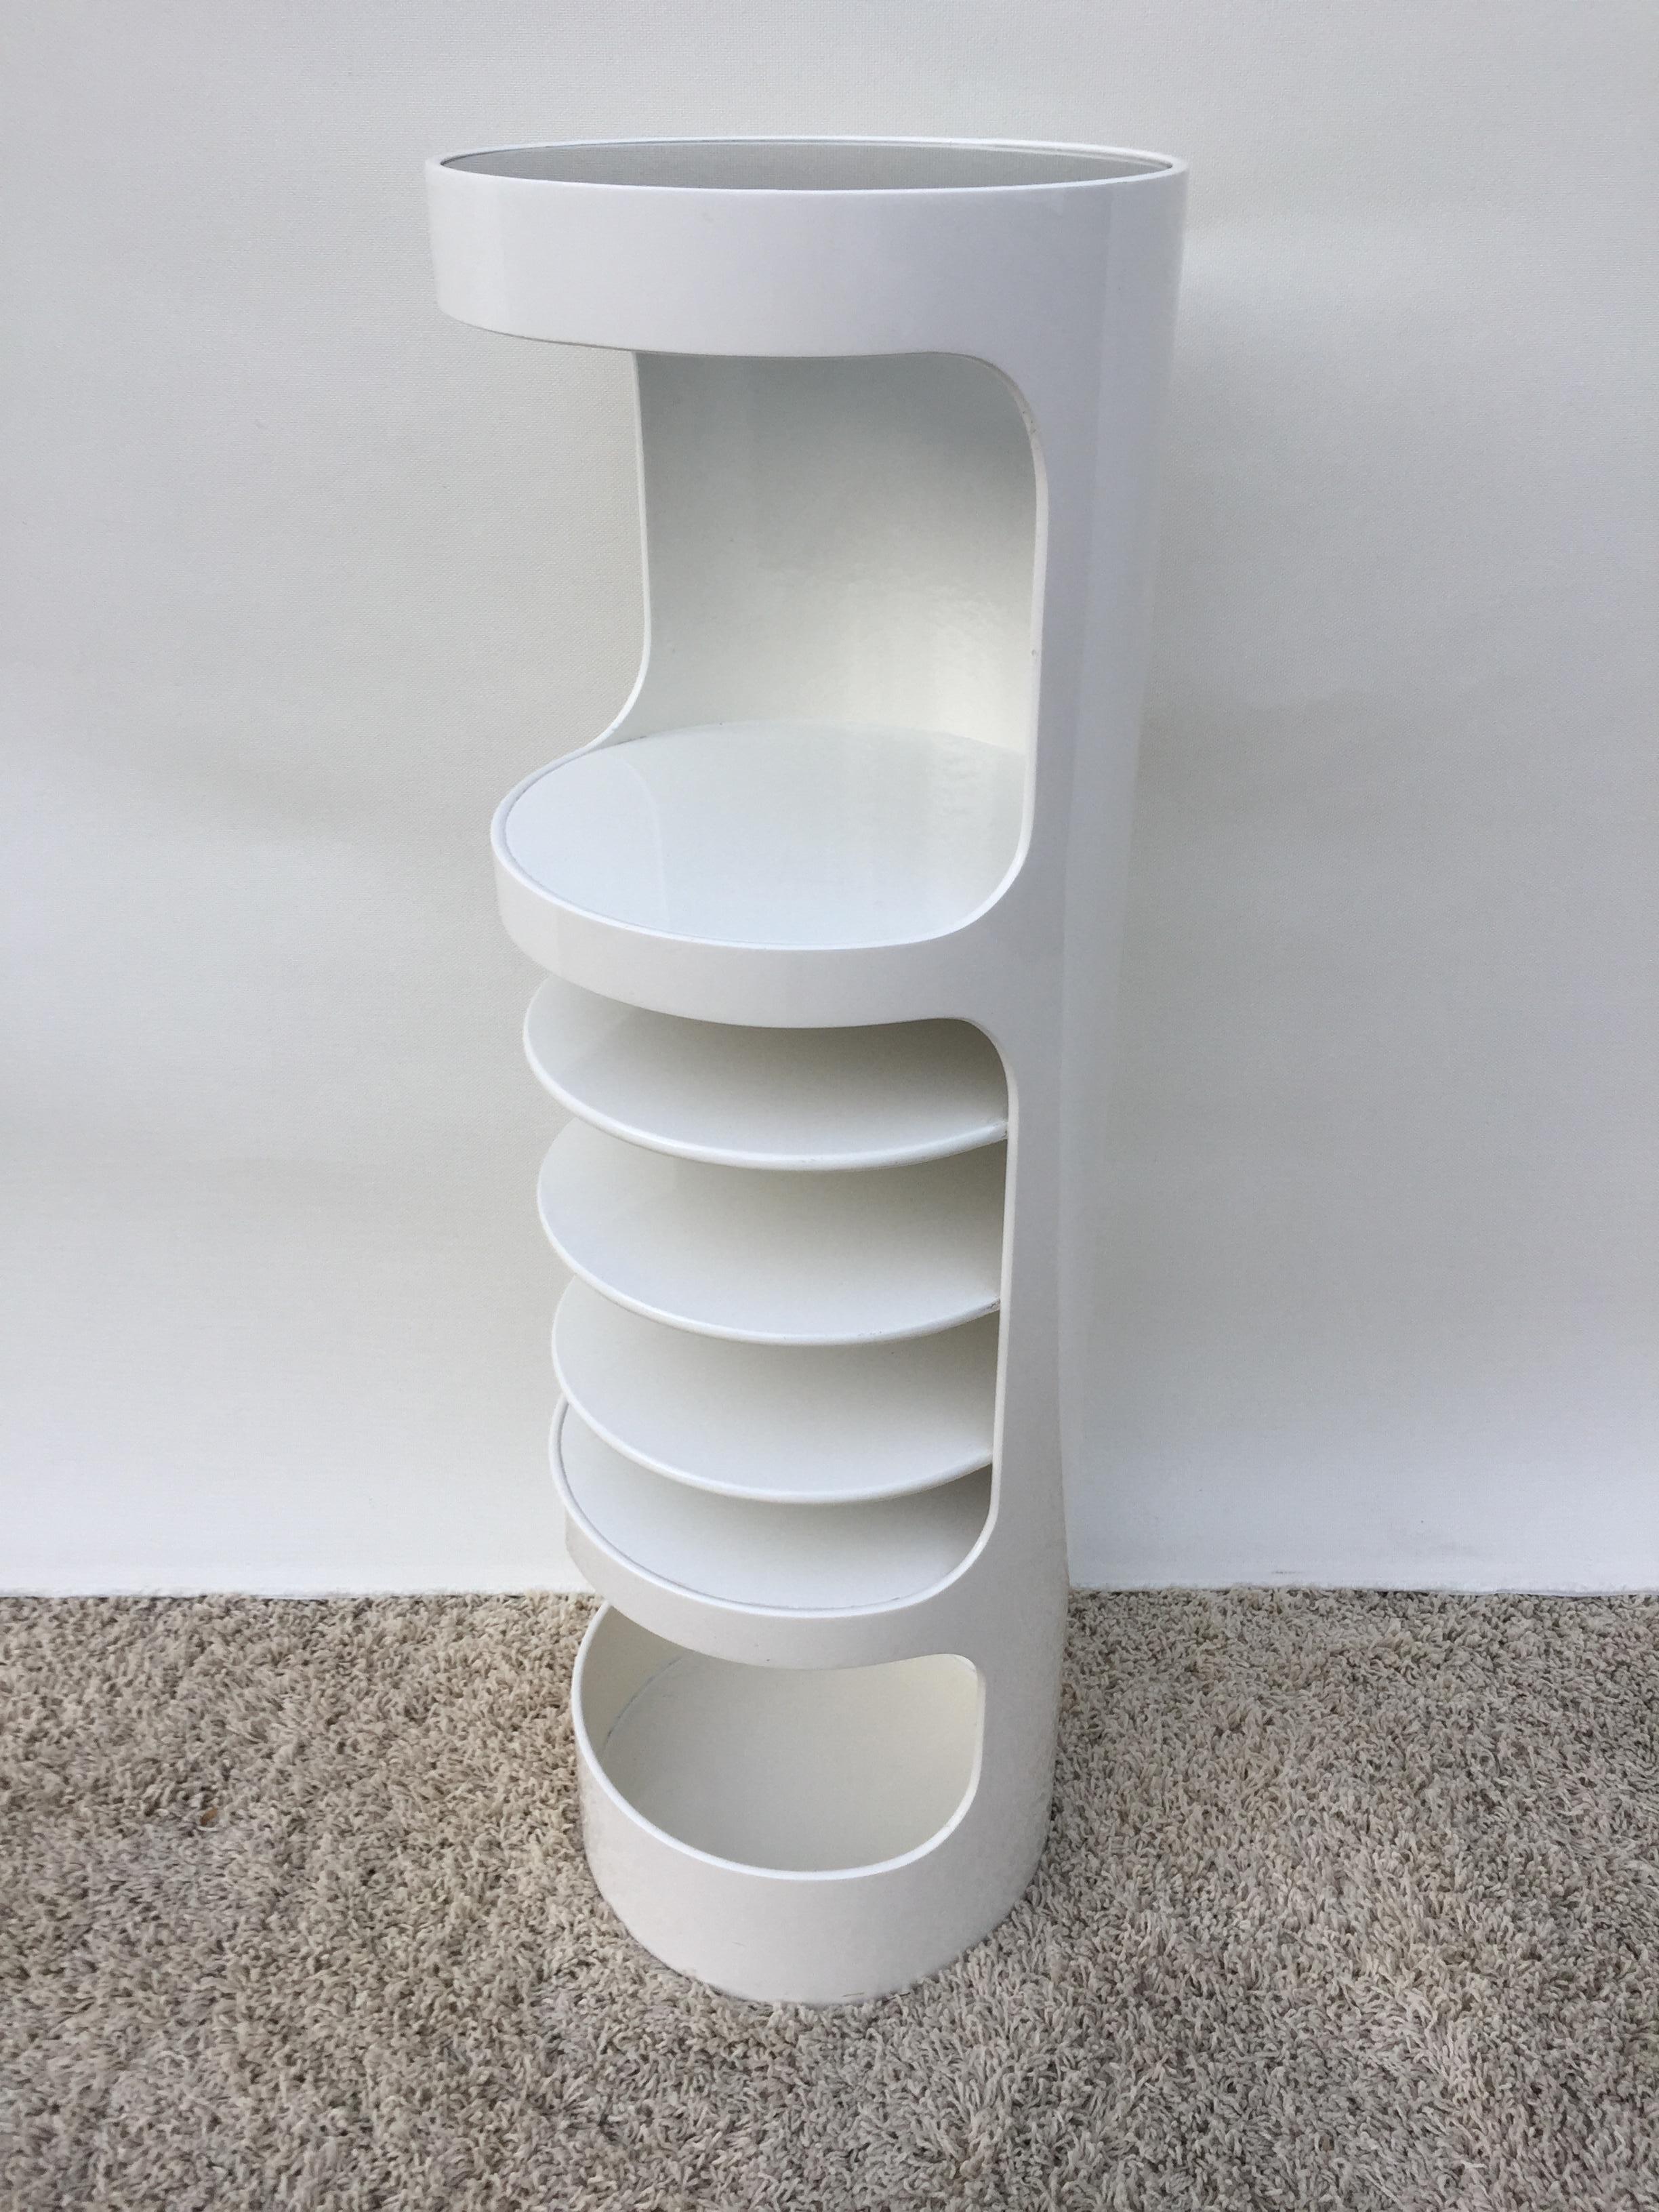 Anodized Tall Pedestal Holland Co. Pedestal or Storage Table Display